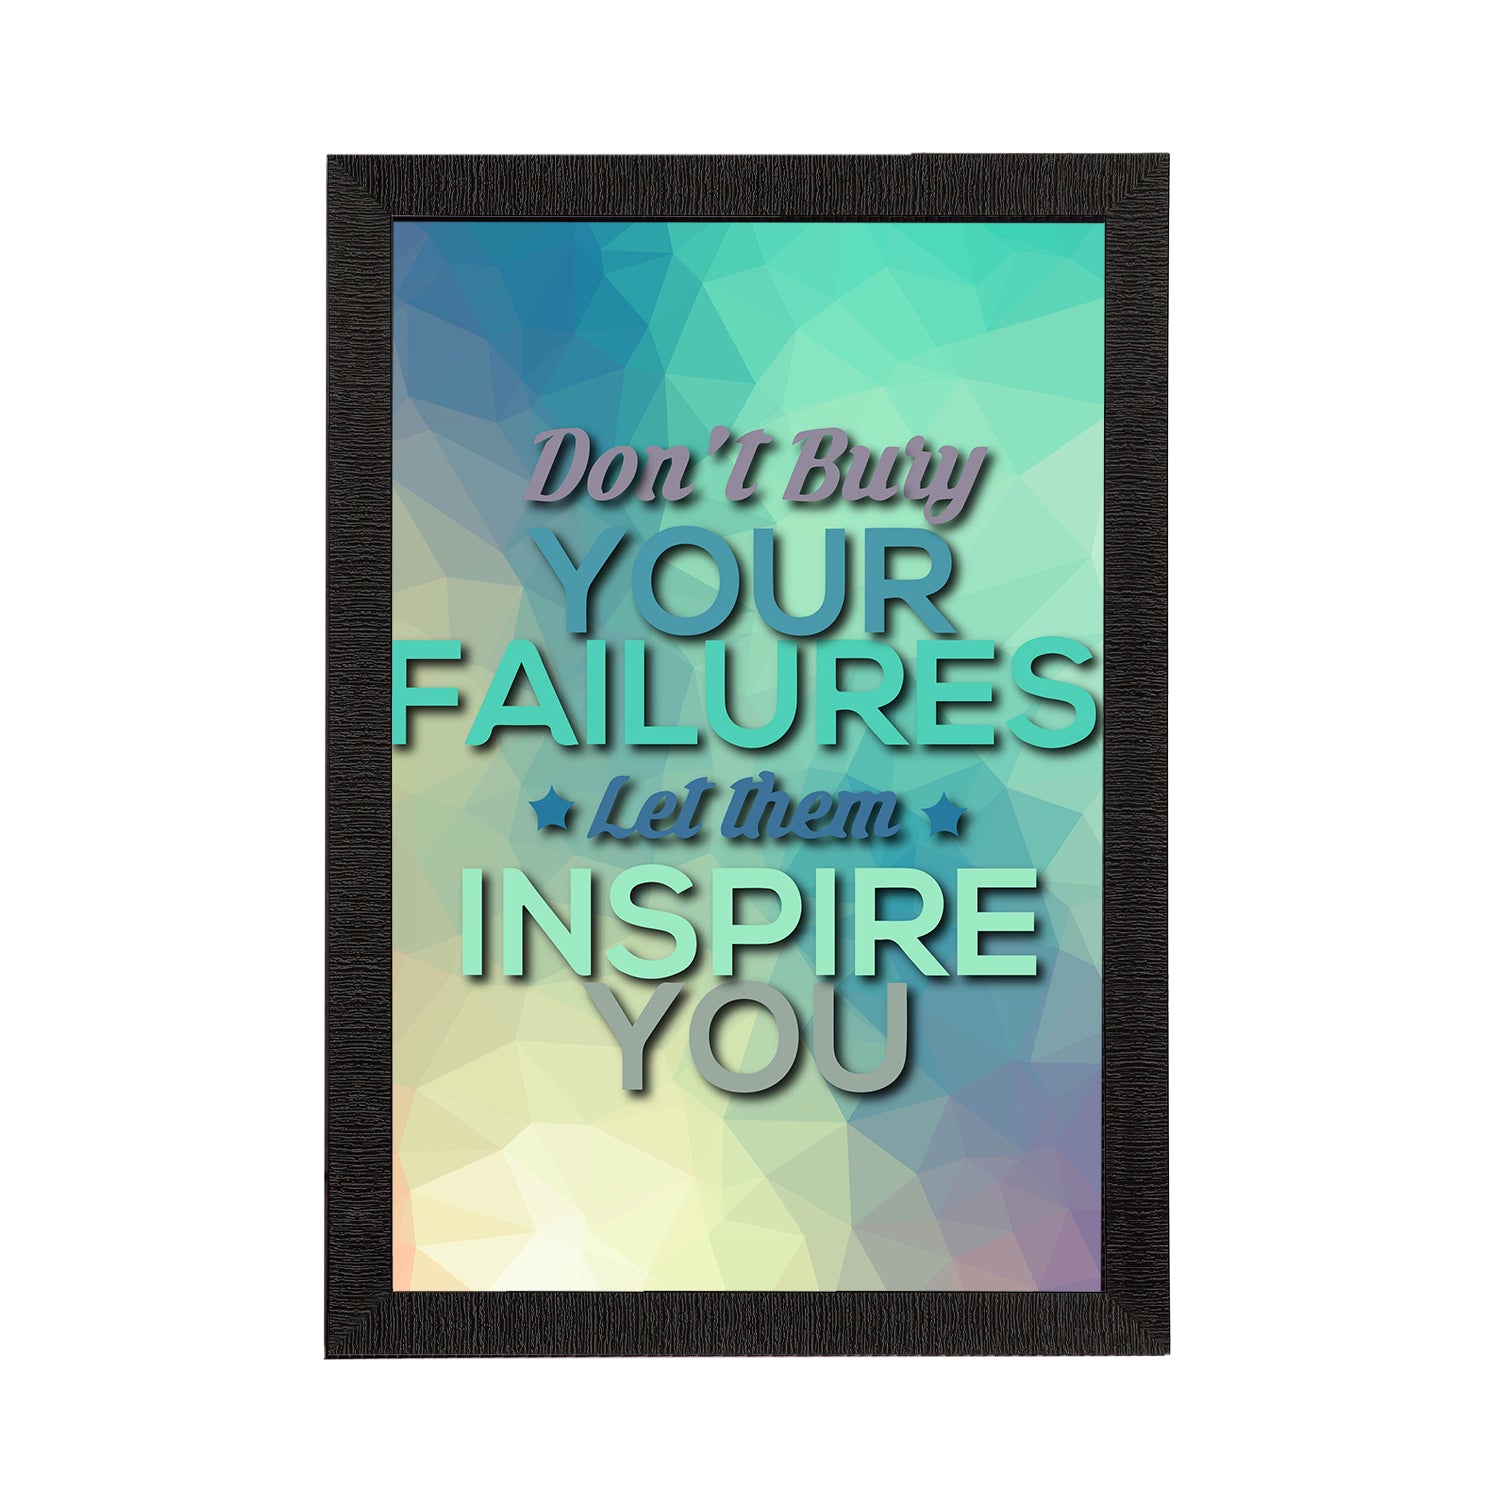 "Don't Buy Your Failures Let Them Inspire You" Motivational Quote Satin Matt Texture UV Art Painting